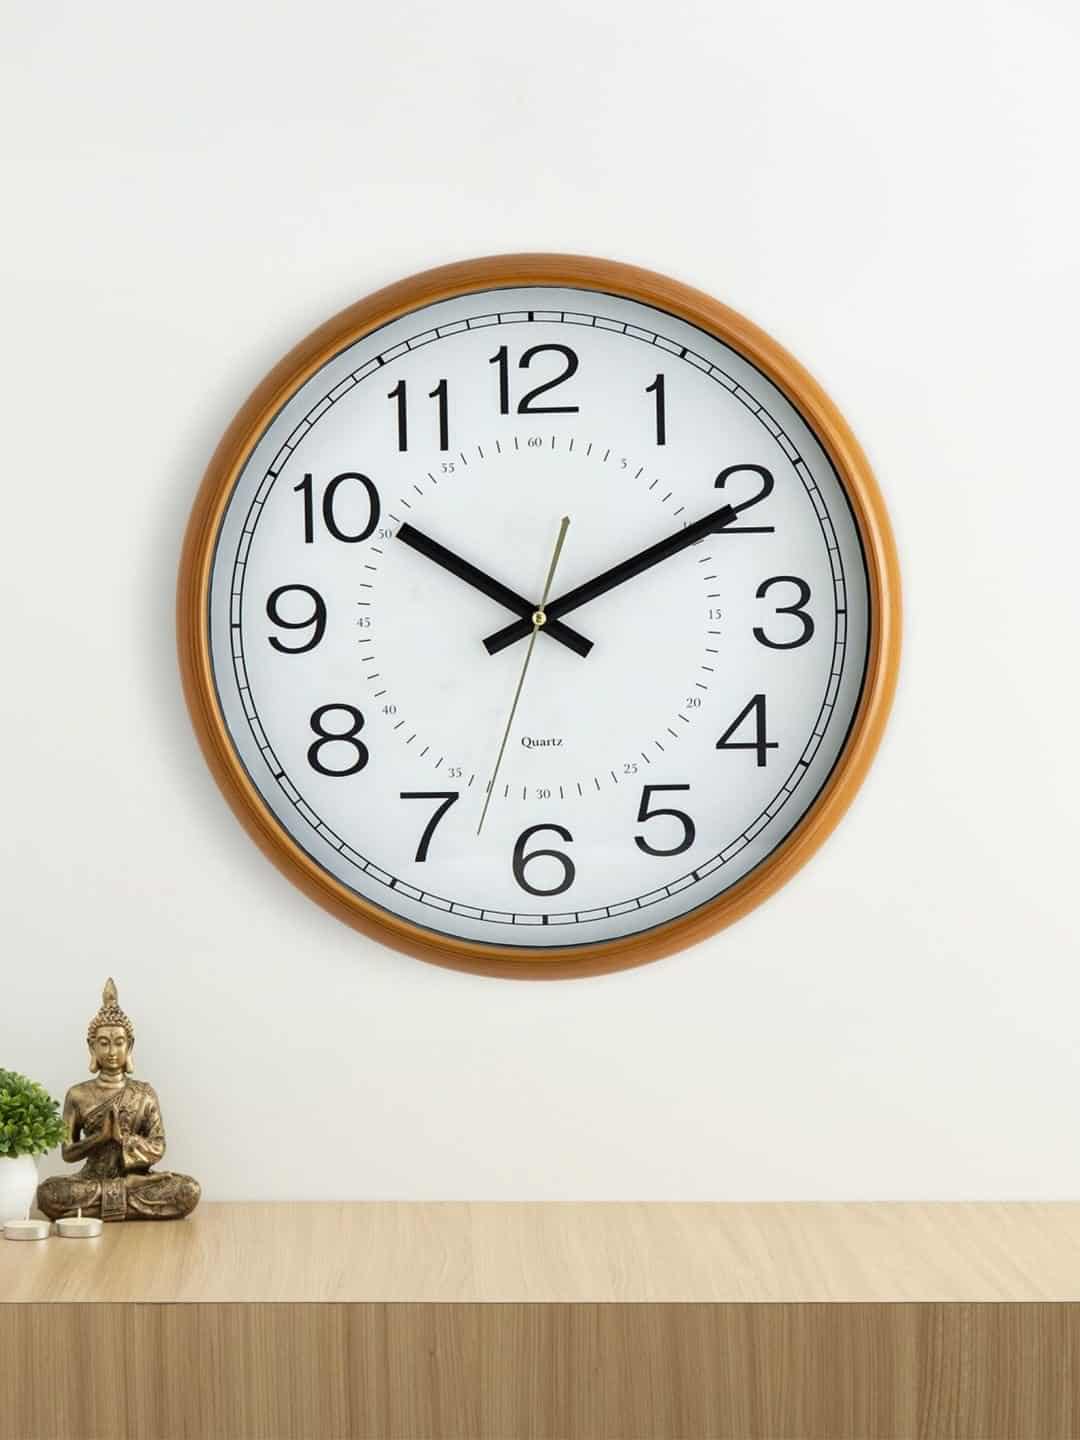 he coolest digital & analogue wall clocks designs for your home online at best price 